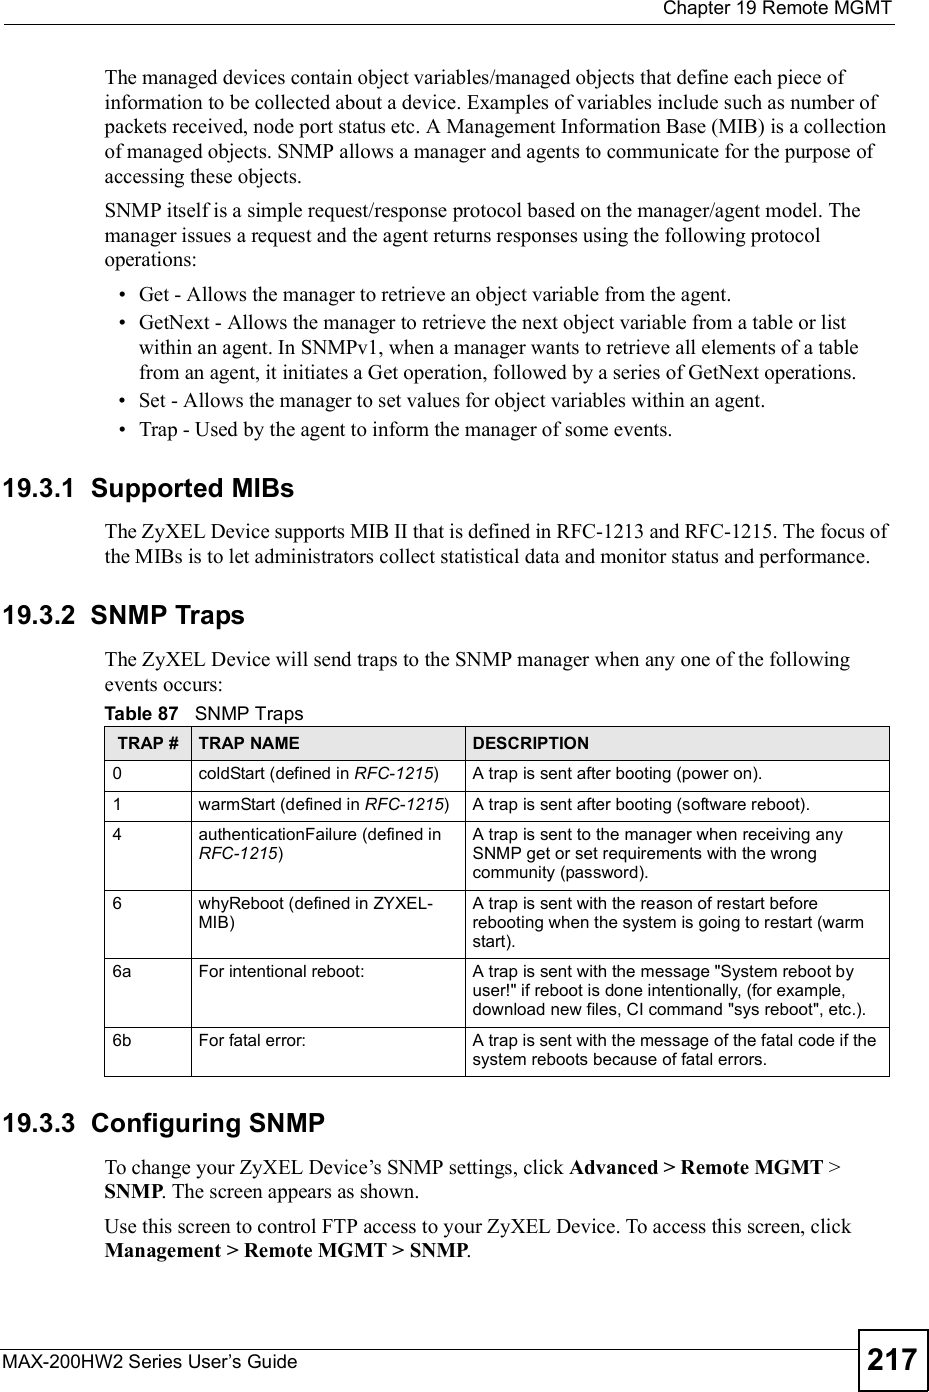  Chapter 19Remote MGMTMAX-200HW2 Series User s Guide 217The managed devices contain object variables/managed objects that define each piece of information to be collected about a device. Examples of variables include such as number of packets received, node port status etc. A Management Information Base (MIB) is a collection of managed objects. SNMP allows a manager and agents to communicate for the purpose of accessing these objects.SNMP itself is a simple request/response protocol based on the manager/agent model. The manager issues a request and the agent returns responses using the following protocol operations: Get - Allows the manager to retrieve an object variable from the agent.  GetNext - Allows the manager to retrieve the next object variable from a table or list within an agent. In SNMPv1, when a manager wants to retrieve all elements of a table from an agent, it initiates a Get operation, followed by a series of GetNext operations.  Set - Allows the manager to set values for object variables within an agent.  Trap - Used by the agent to inform the manager of some events.19.3.1  Supported MIBsThe ZyXEL Device supports MIB II that is defined in RFC-1213 and RFC-1215. The focus of the MIBs is to let administrators collect statistical data and monitor status and performance.19.3.2  SNMP Traps The ZyXEL Device will send traps to the SNMP manager when any one of the following events occurs:19.3.3  Configuring SNMPTo change your ZyXEL Device!s SNMP settings, click Advanced &gt; Remote MGMT &gt; SNMP. The screen appears as shown.Use this screen to control FTP access to your ZyXEL Device. To access this screen, click Management &gt; Remote MGMT &gt; SNMP.Table 87   SNMP TrapsTRAP # TRAP NAME DESCRIPTION0coldStart (defined in RFC-1215)A trap is sent after booting (power on).1warmStart (defined in RFC-1215)A trap is sent after booting (software reboot).4authenticationFailure (defined in RFC-1215)A trap is sent to the manager when receiving any SNMP get or set requirements with the wrong community (password).6whyReboot (defined in ZYXEL-MIB)A trap is sent with the reason of restart before rebooting when the system is going to restart (warm start).6a For intentional reboot: A trap is sent with the message &quot;System reboot by user!&quot; if reboot is done intentionally, (for example, download new files, CI command &quot;sys reboot&quot;, etc.).6b For fatal error:  A trap is sent with the message of the fatal code if the system reboots because of fatal errors.